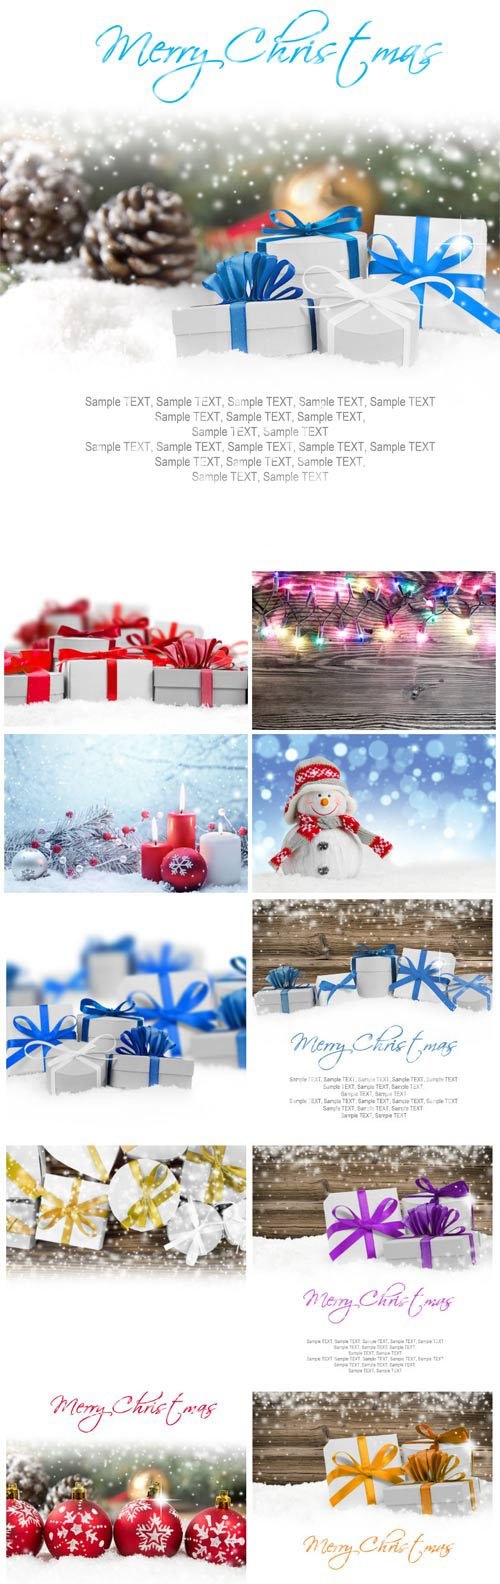 New Year and Christmas stock photos - 18